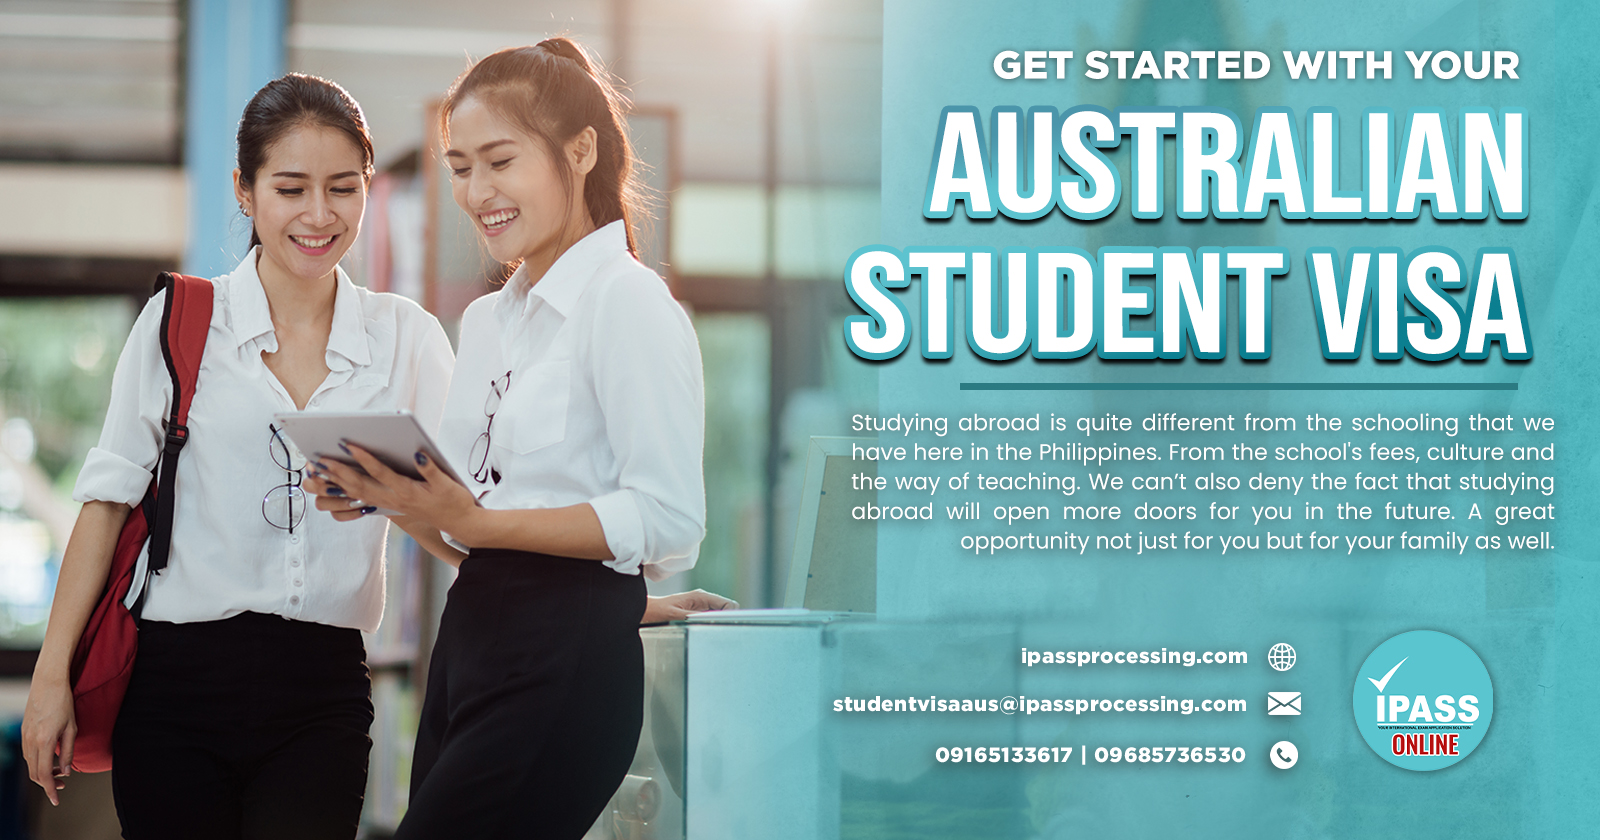 GET STARTED WITH YOUR AUSTRALIAN STUDENT VISA